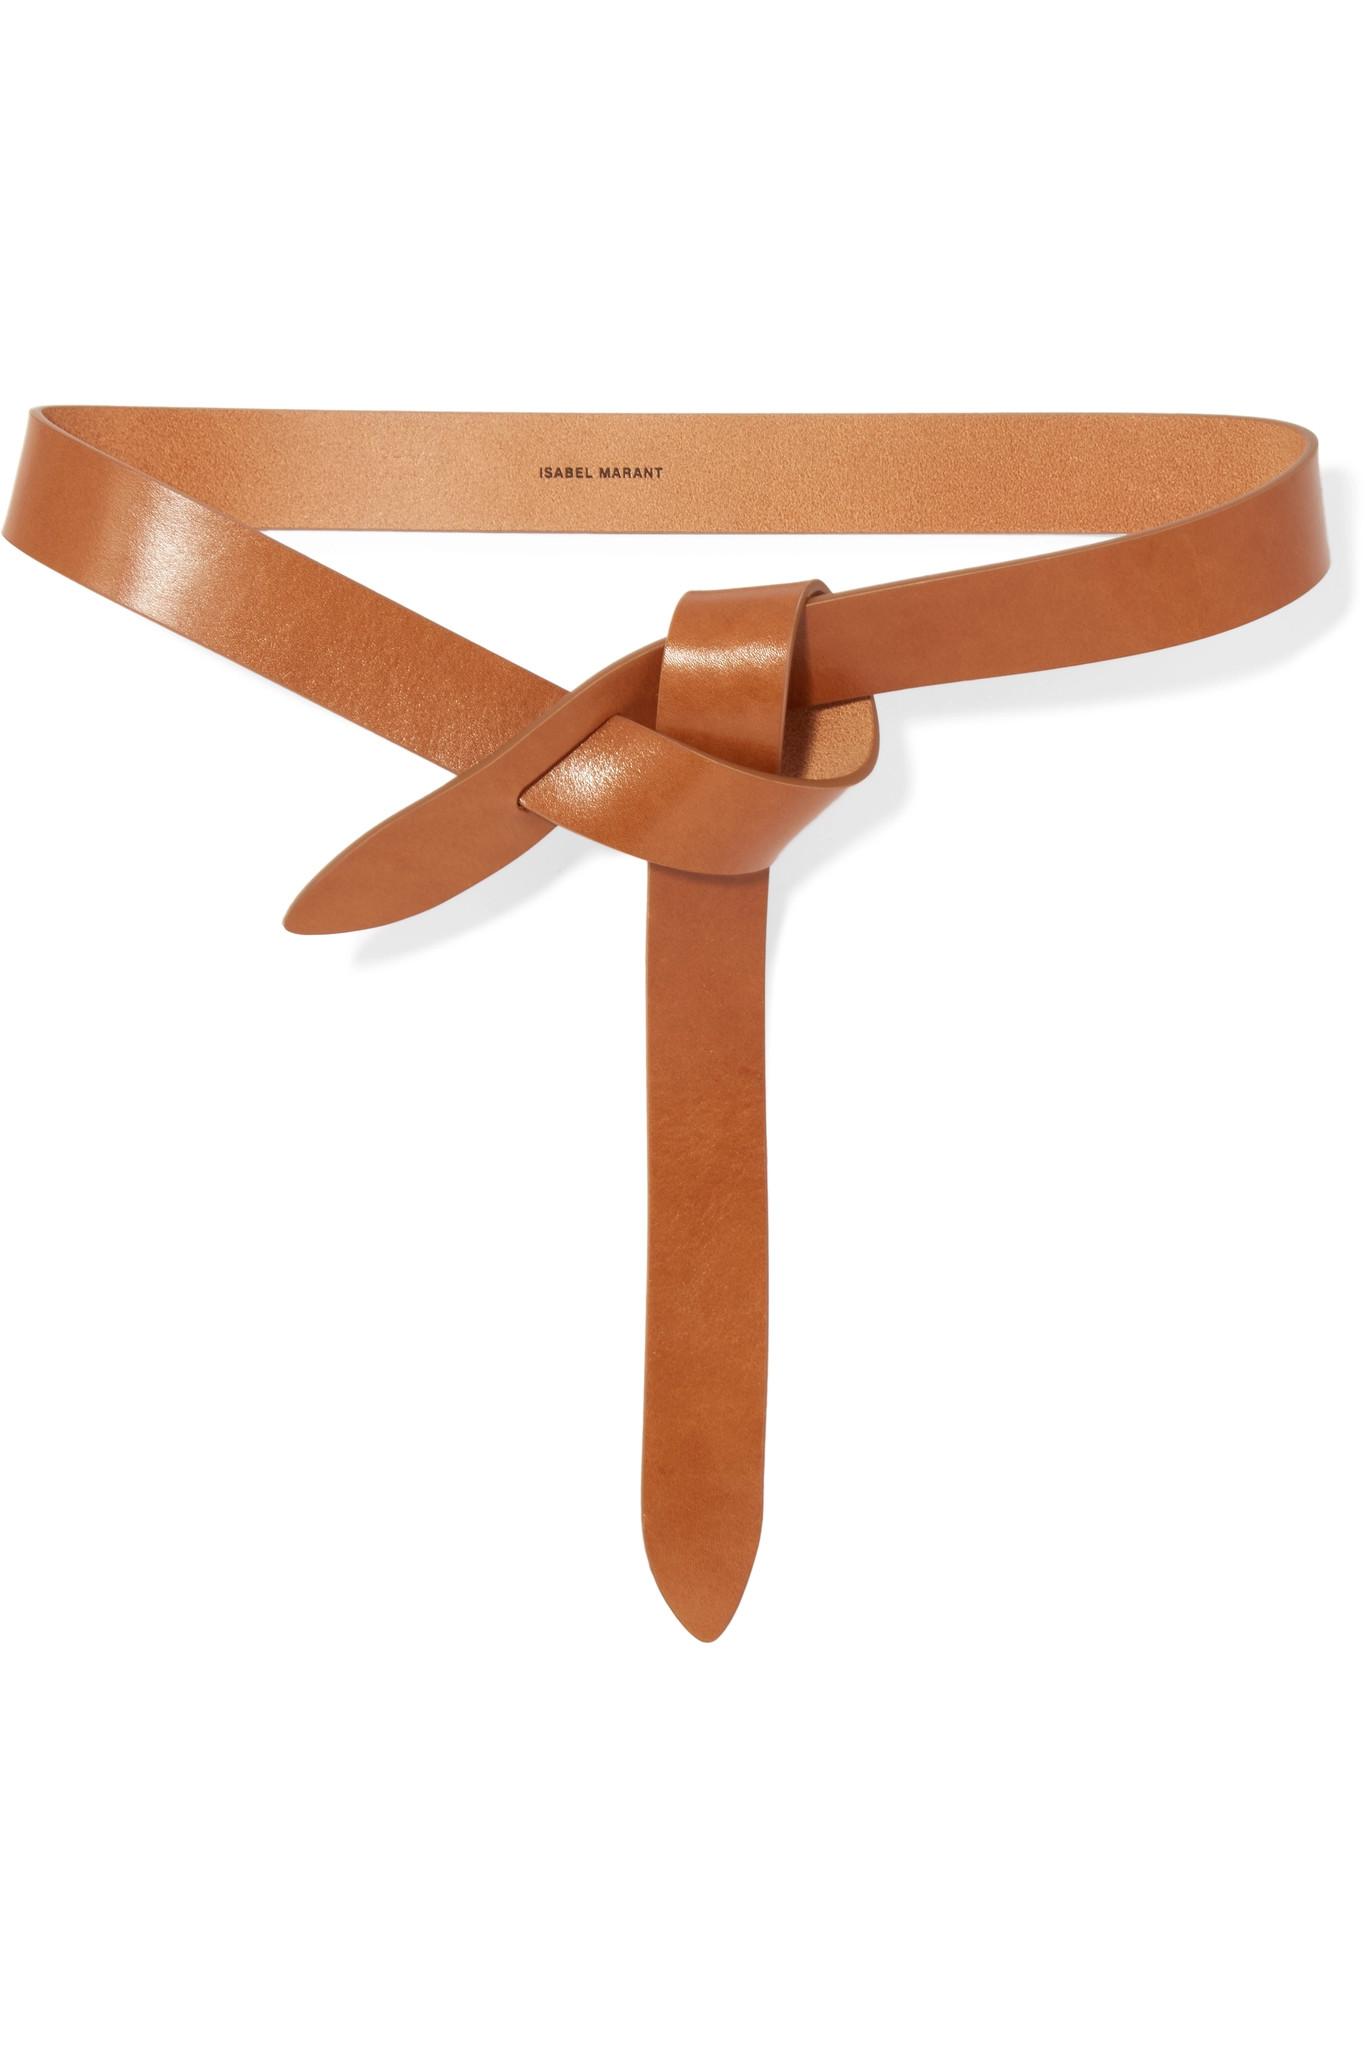 Isabel Marant Lecce Leather Belt in Tan (Brown) - Lyst